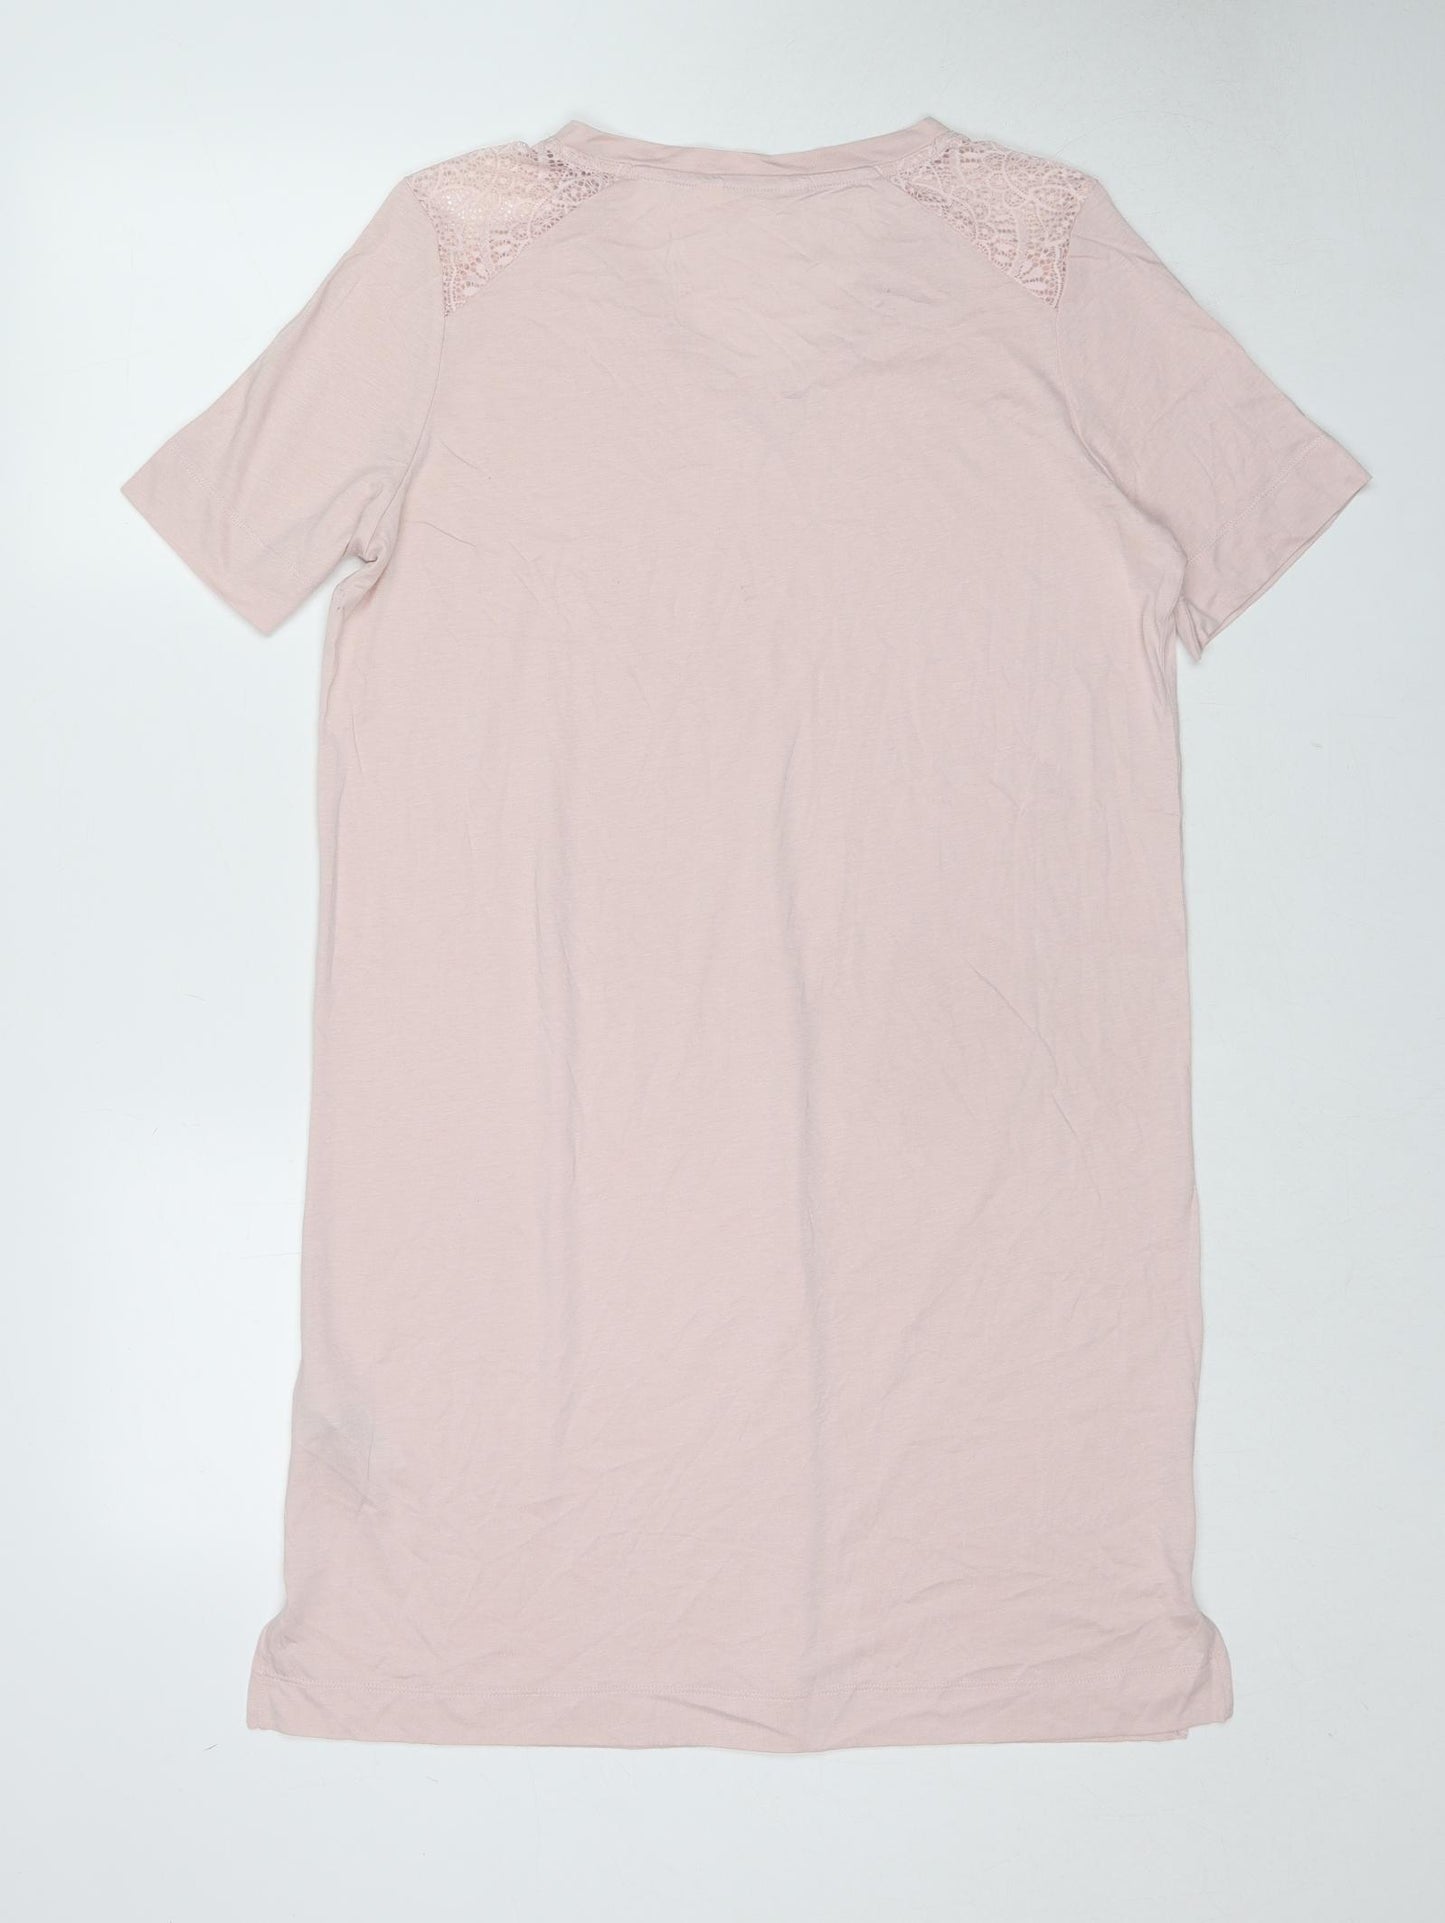 Marks and Spencer Womens Pink Solid Cotton Top Dress Size M